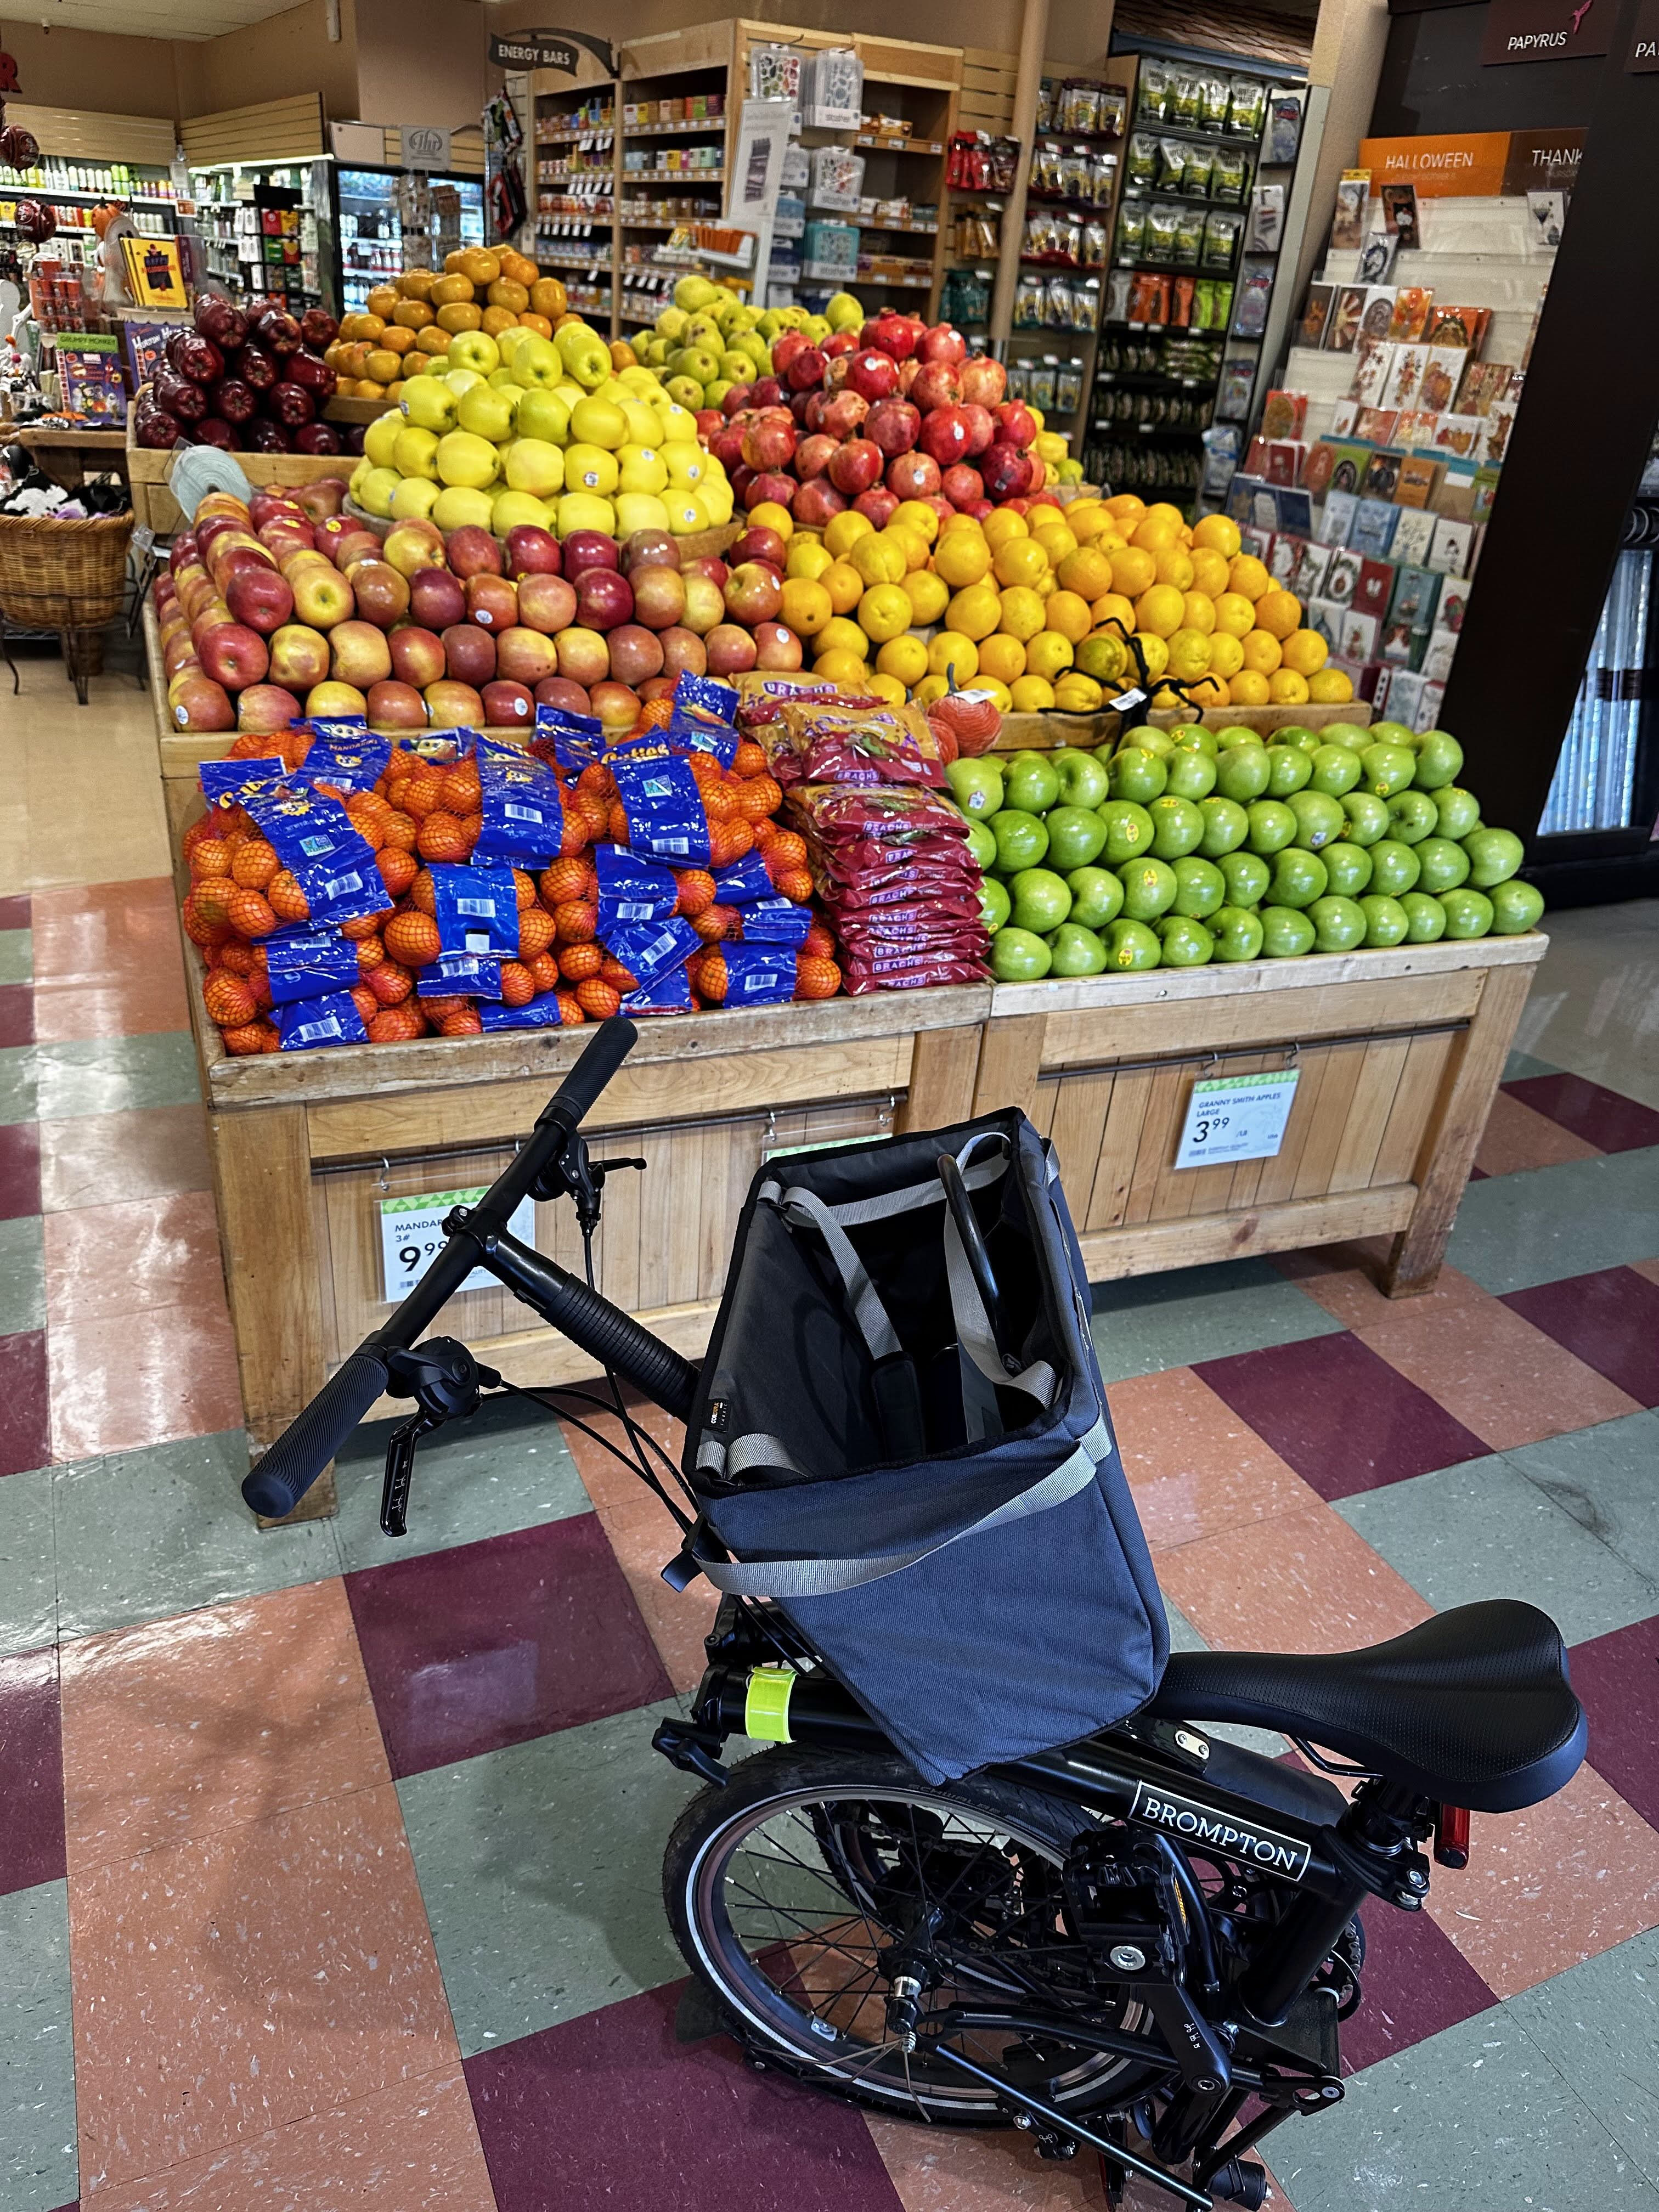 My Brompton in &lsquo;Shopping Cart Mode&rsquo; in front of a grocery fruit display. It is partially folded with the Borough basket bag mounted to the front.